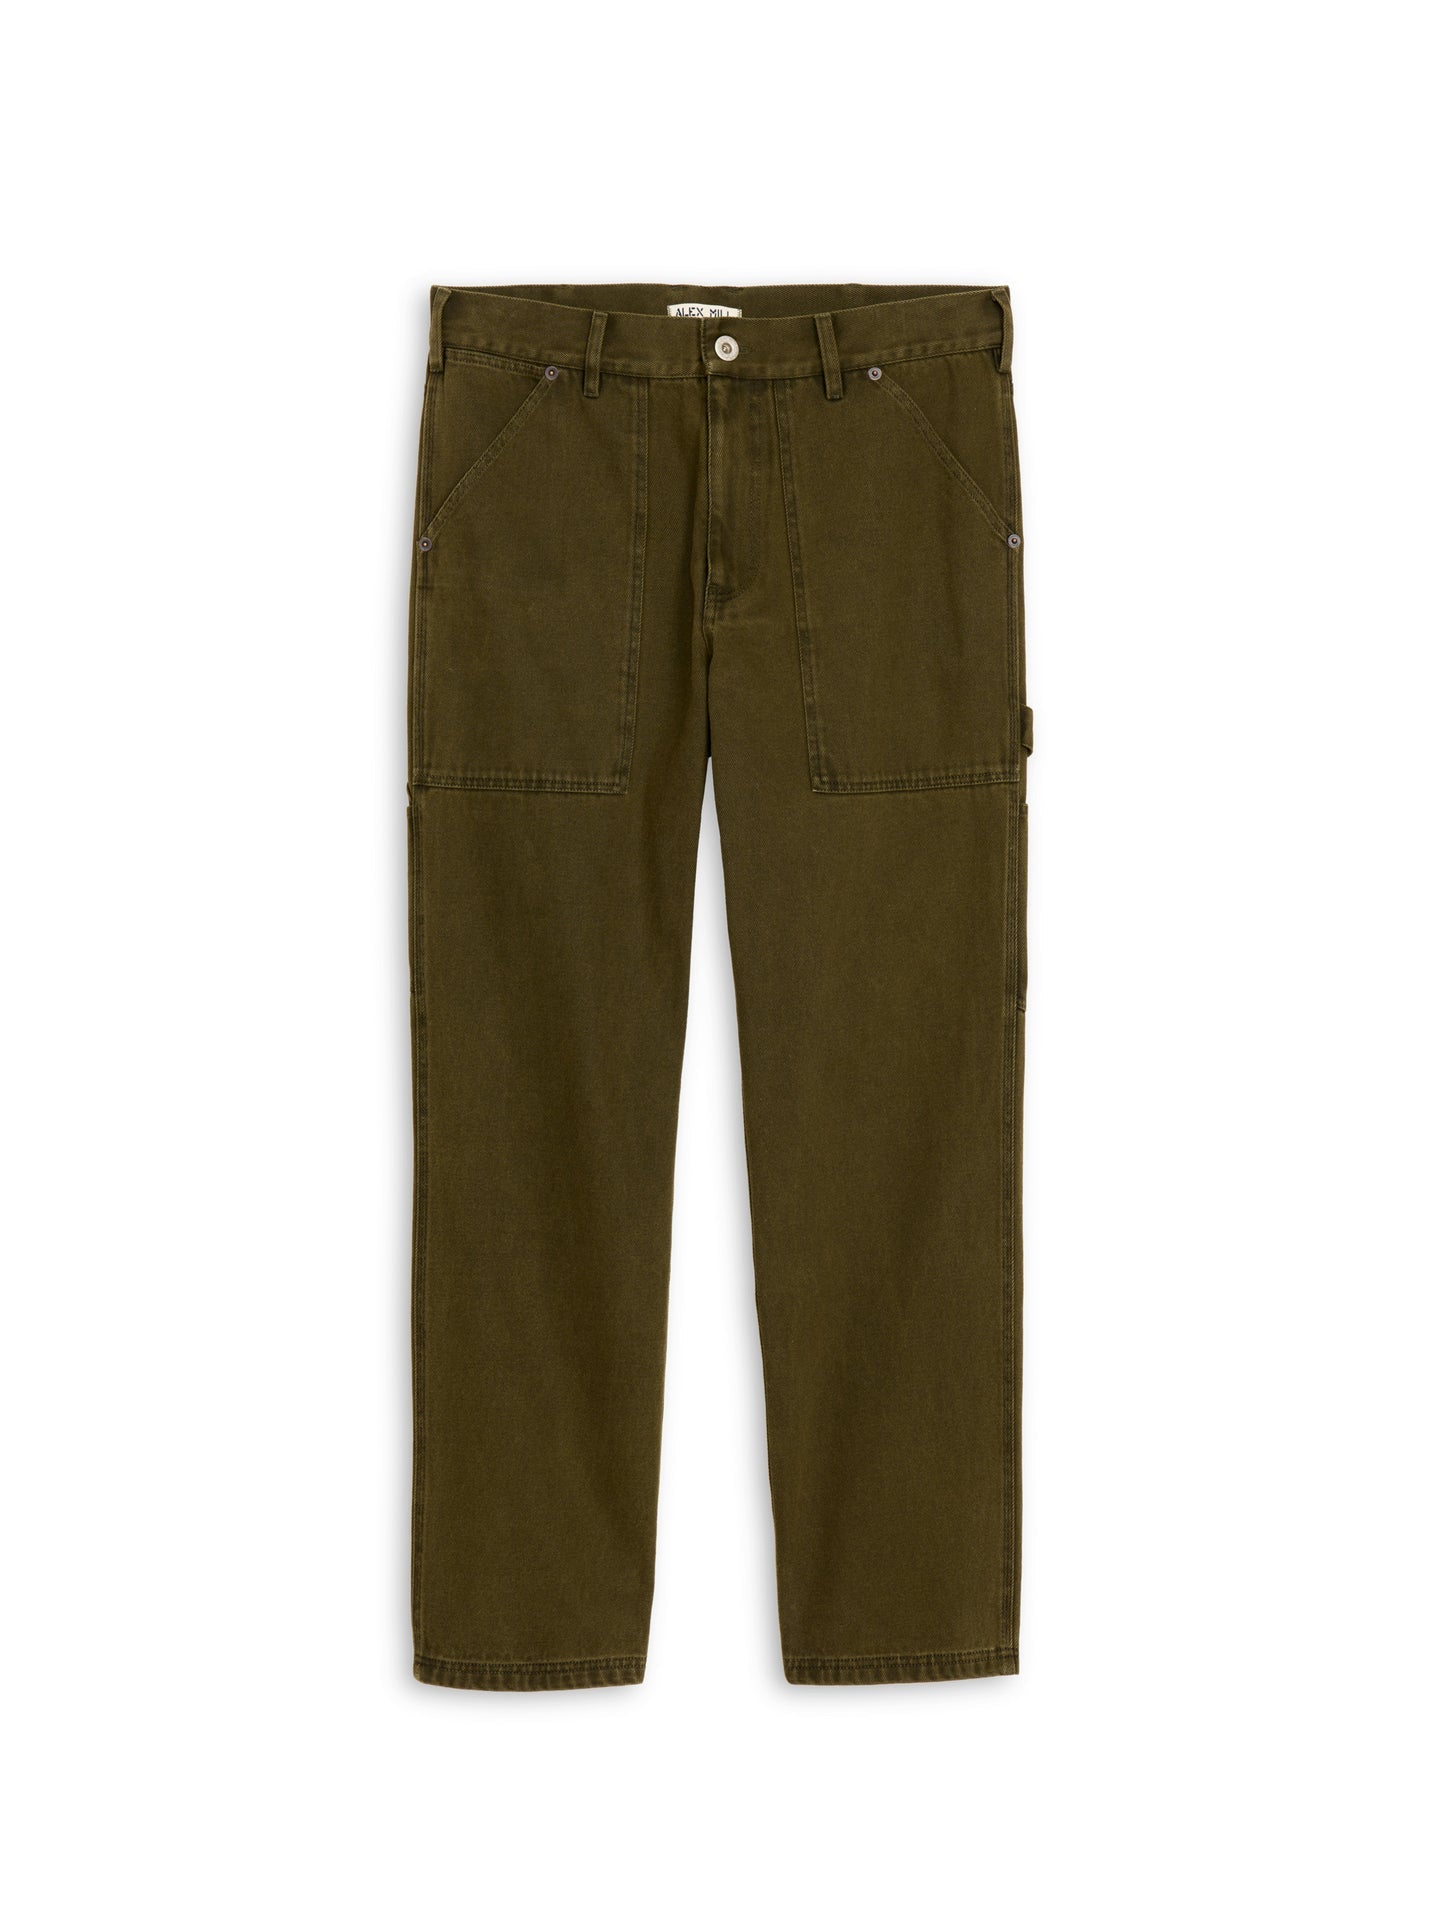 The Painter Pant in Recycled Denim - Military Olive